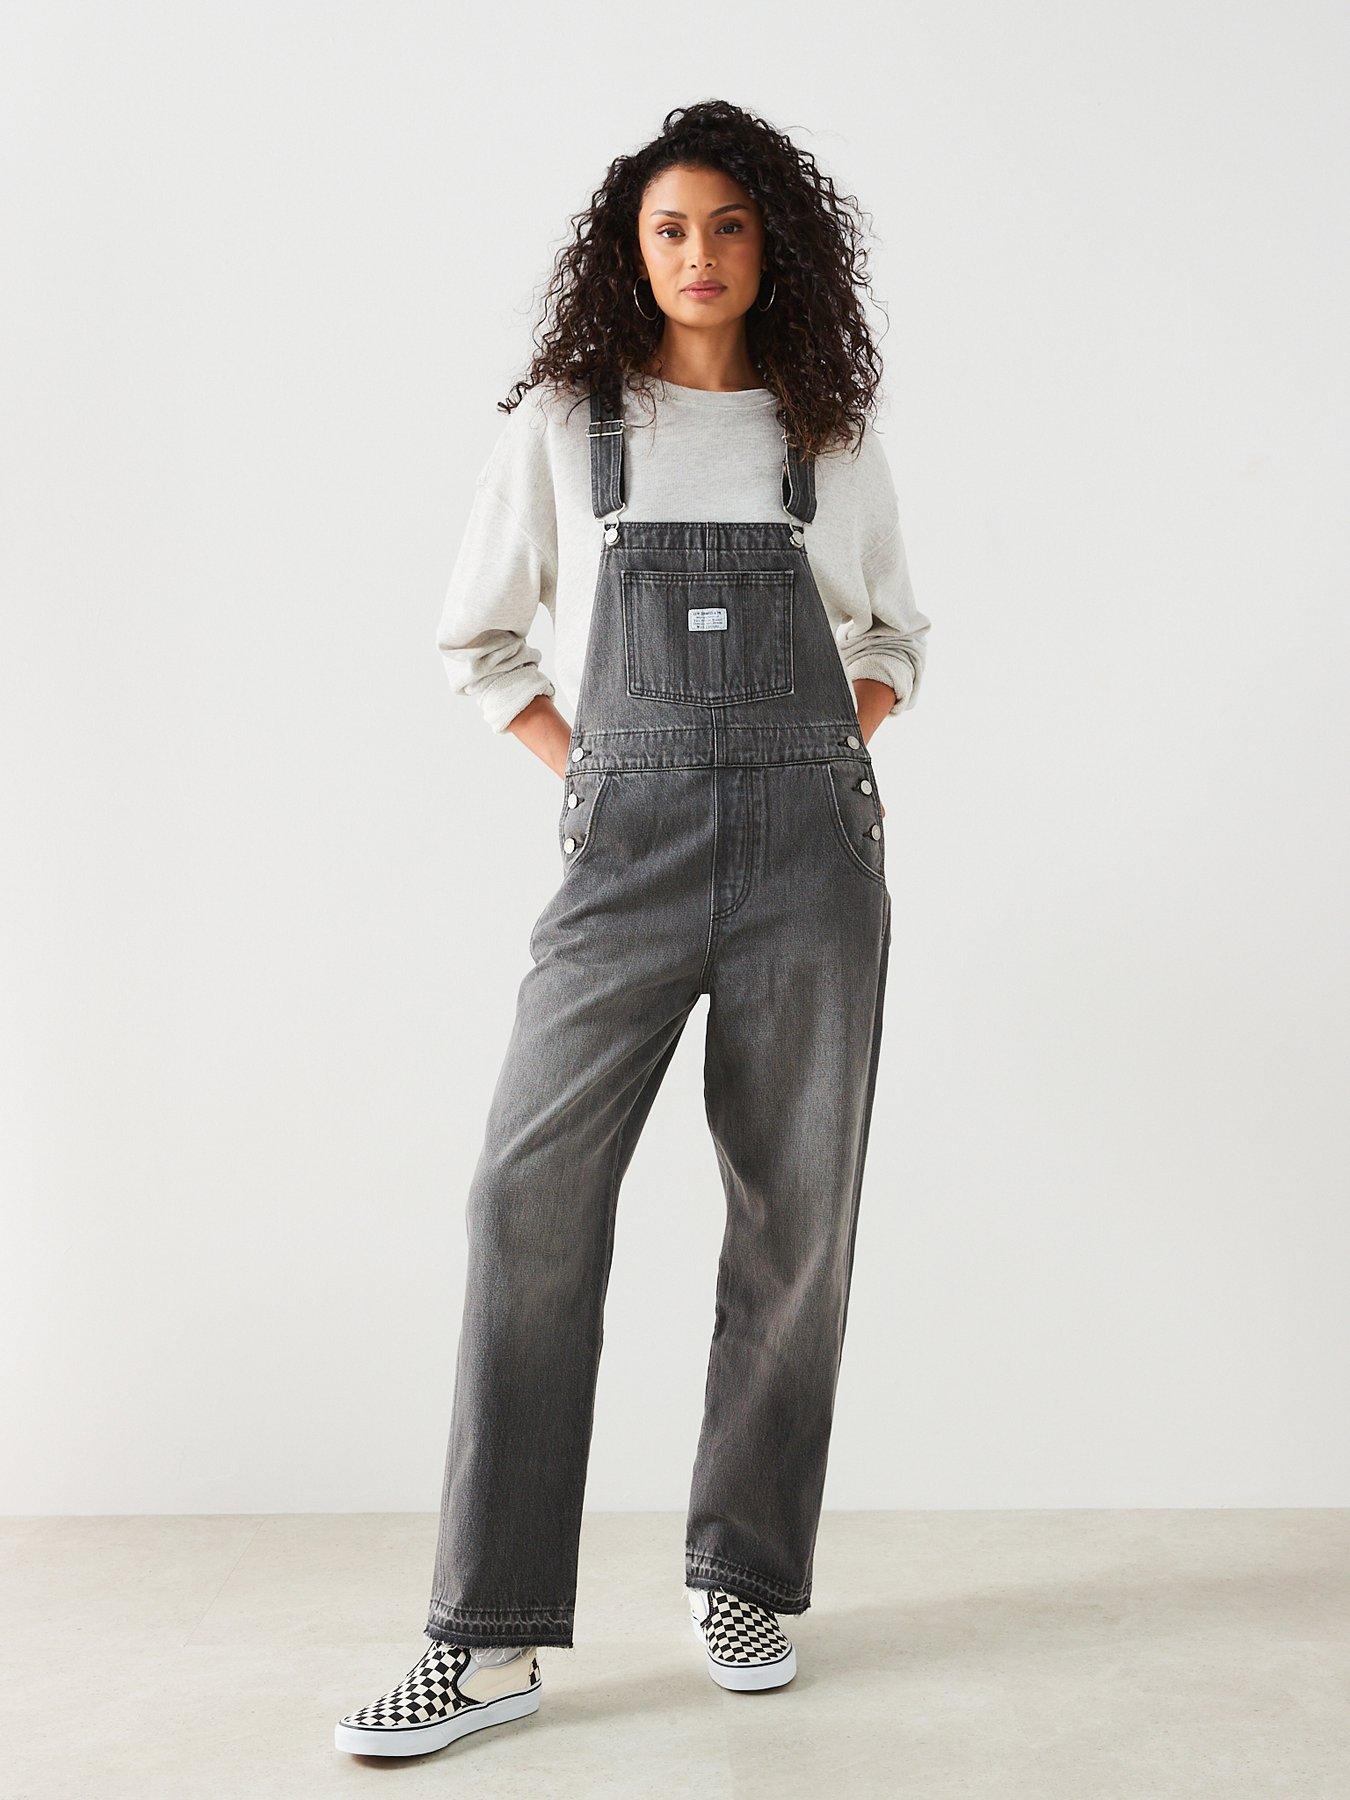 WHITE STUFF Daphne Cotton Dungarees in Navy